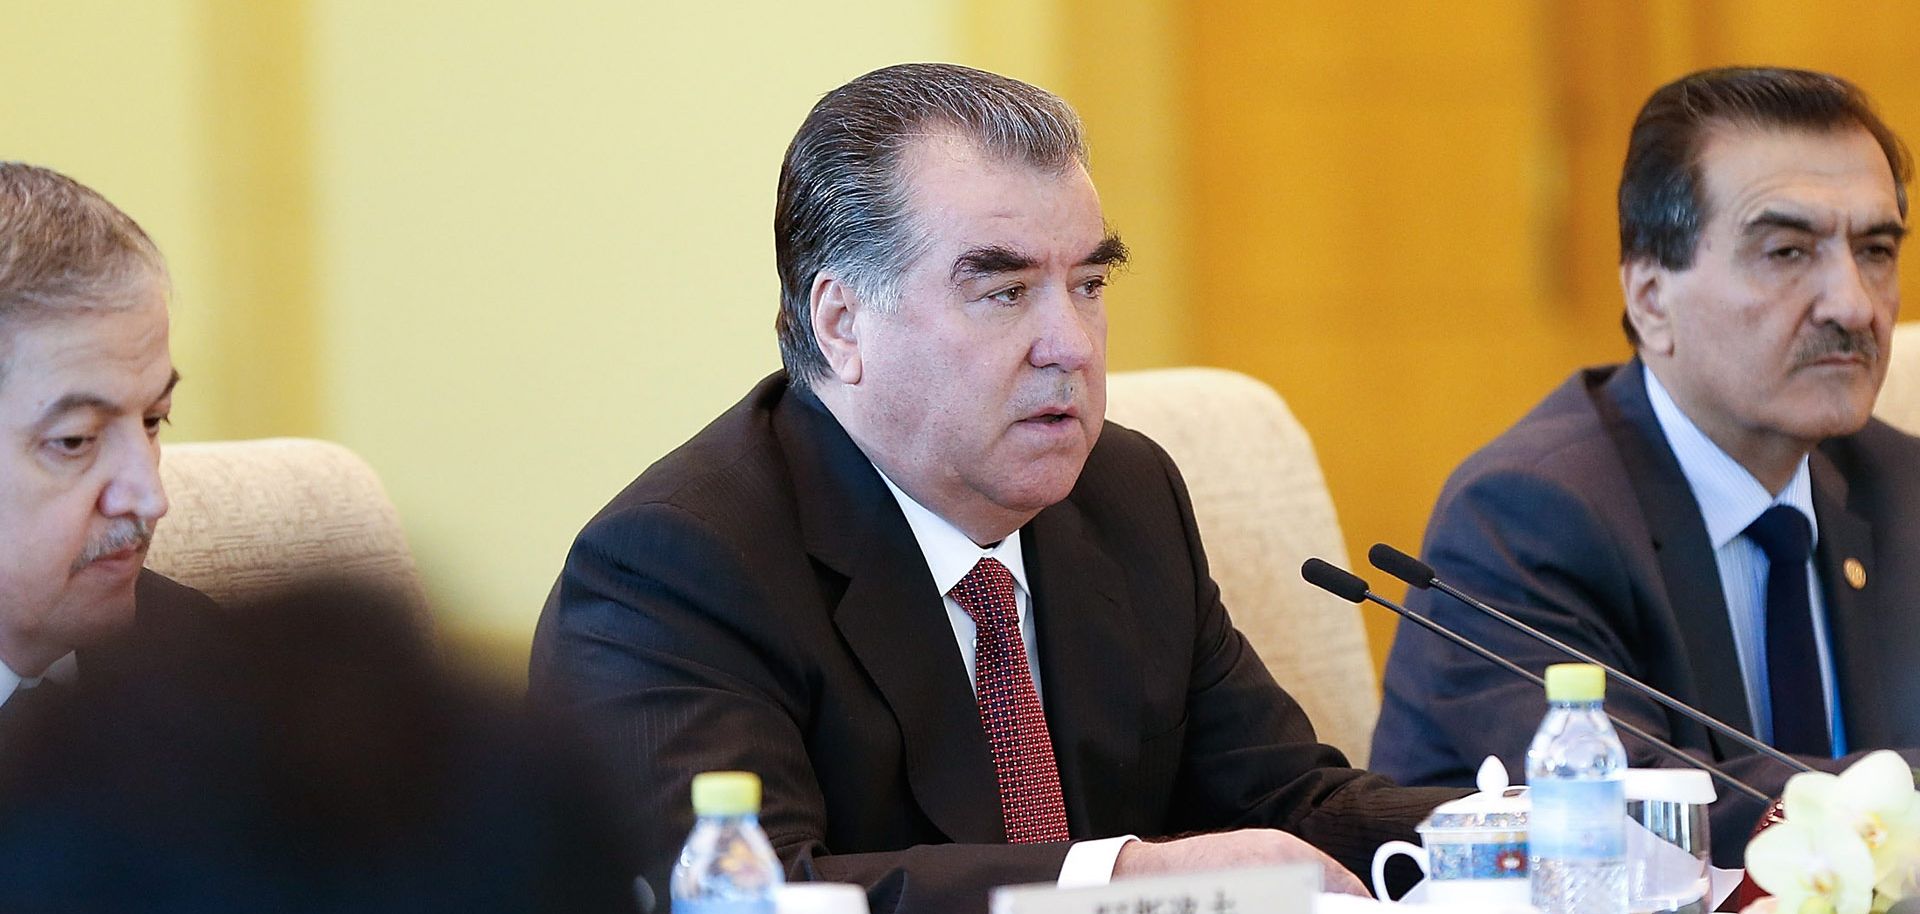 In Tajikistan, a Bad Time for Unrest